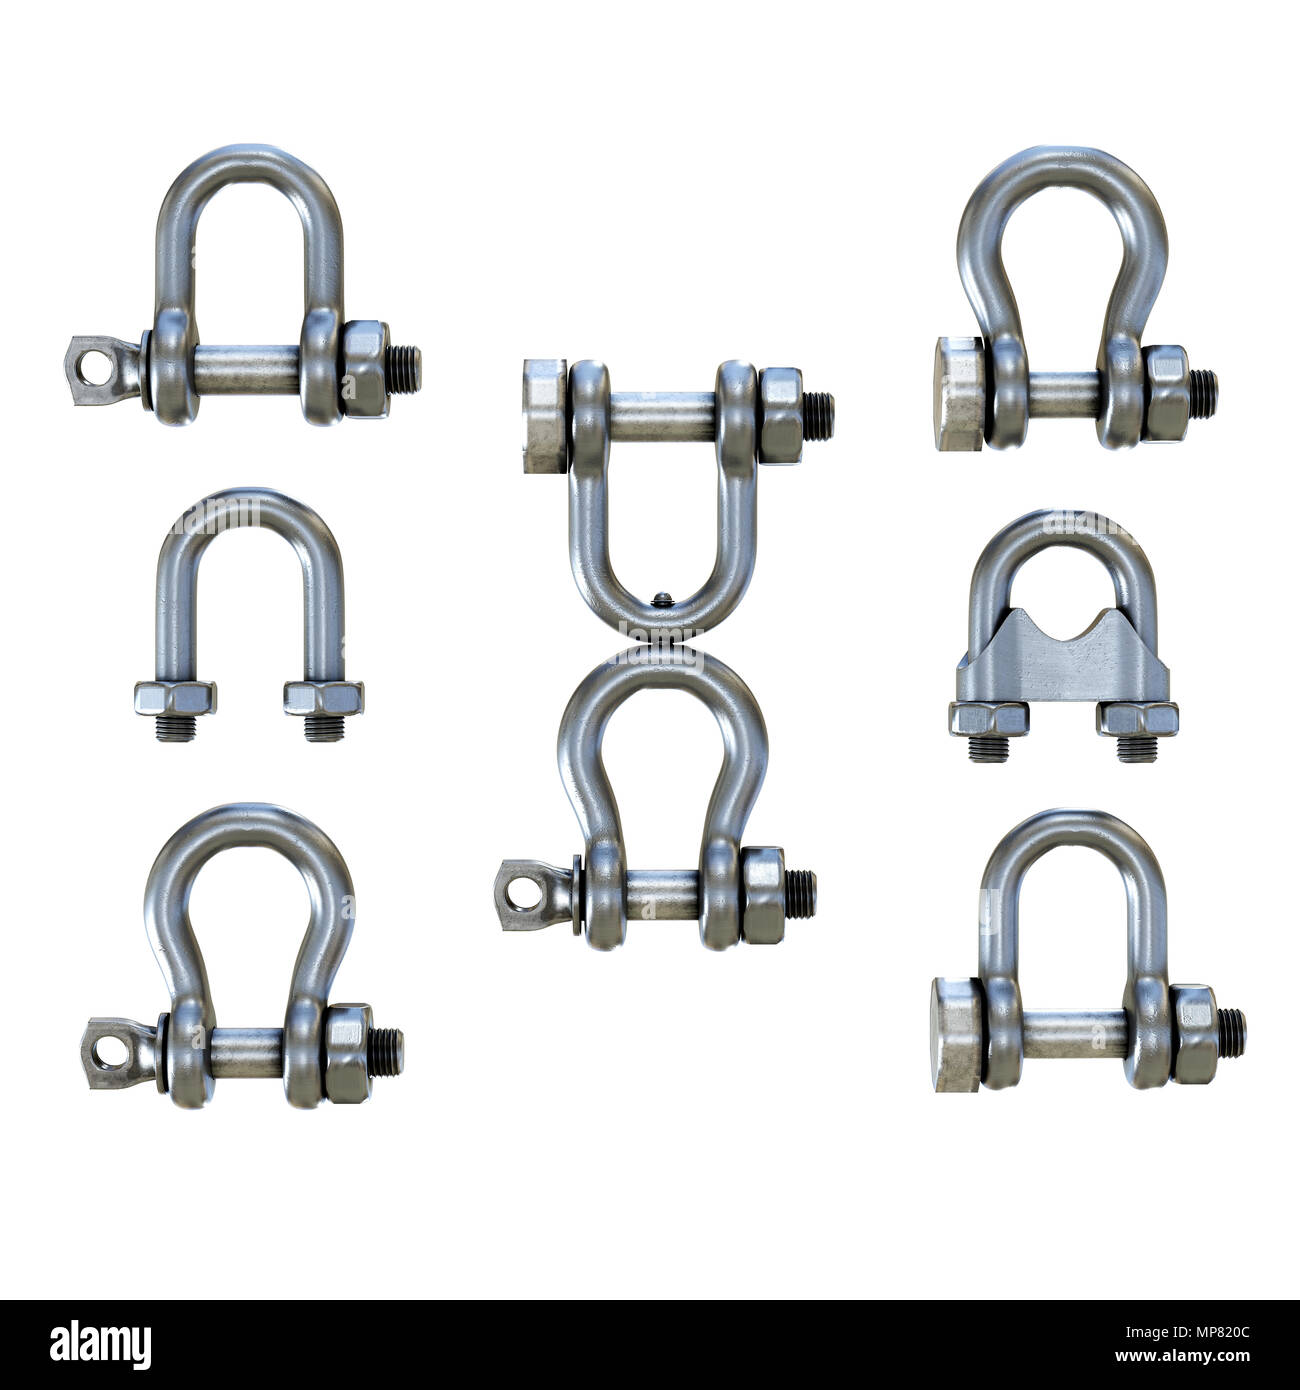 Stainless Steel Shackle Stock Photo